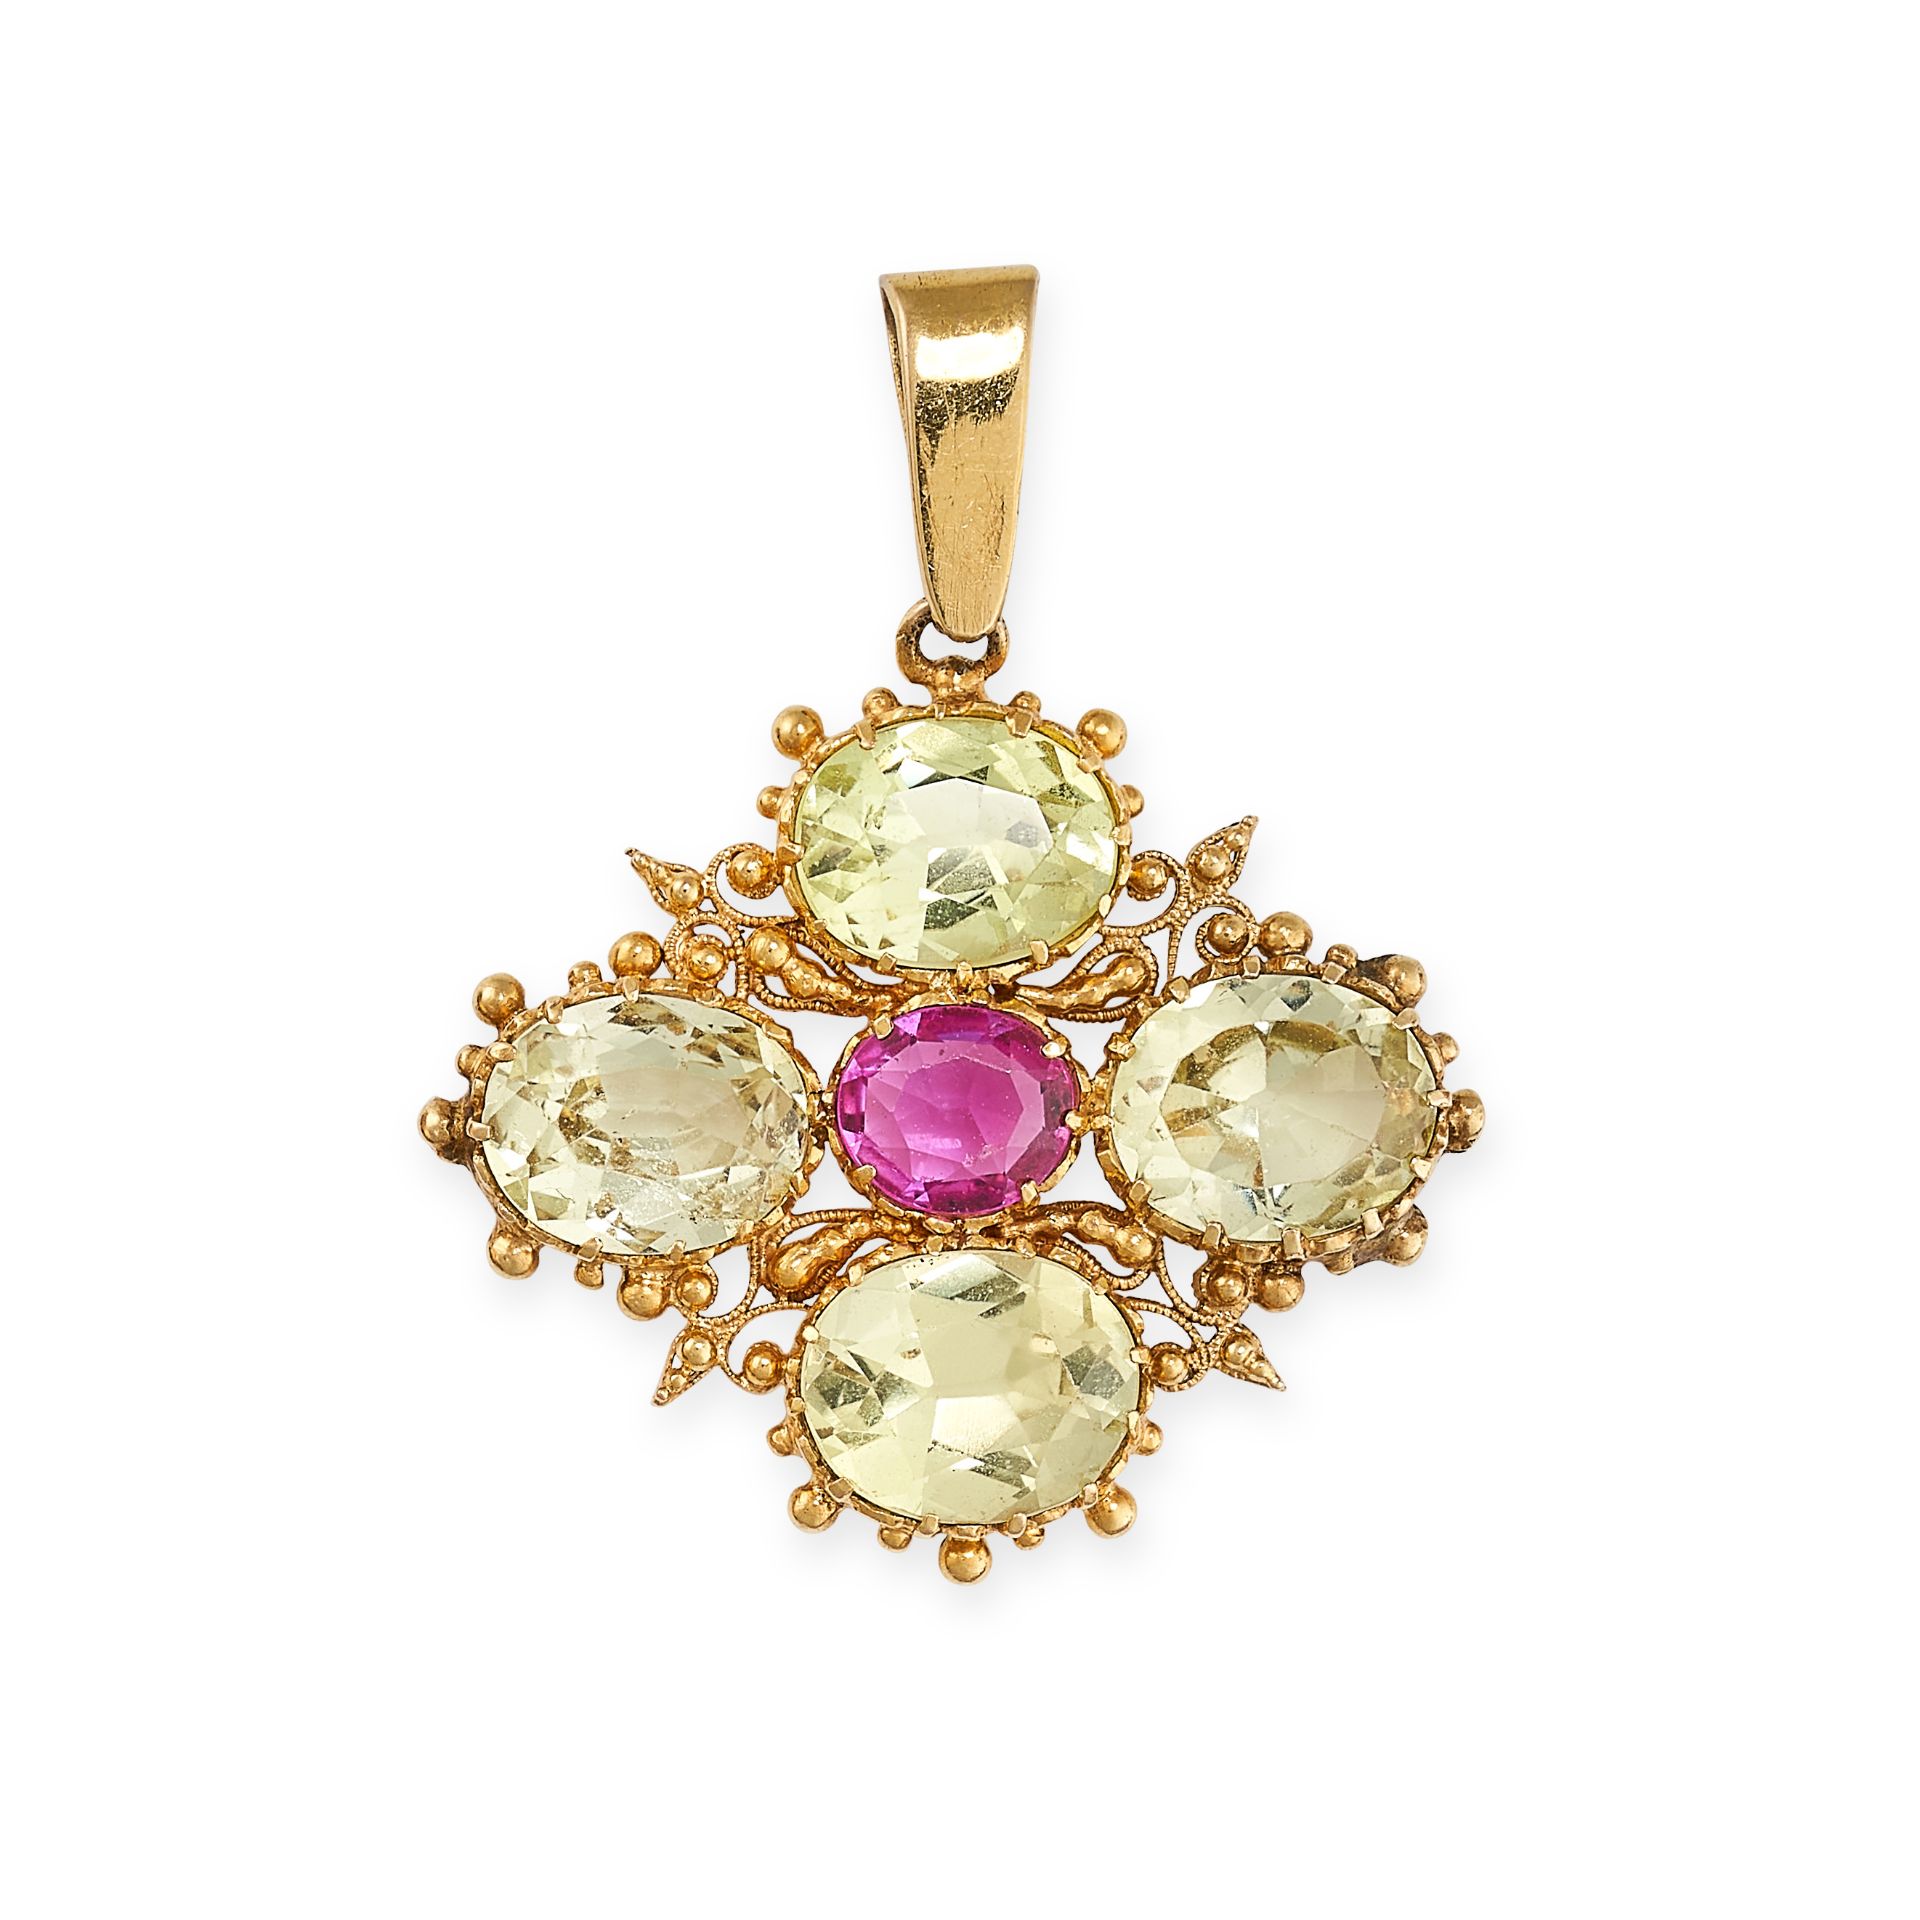 A CHRYSOBERYL AND PINK SAPPHIRE CANNETILLE PENDANT in yellow gold, set with an oval cut pink